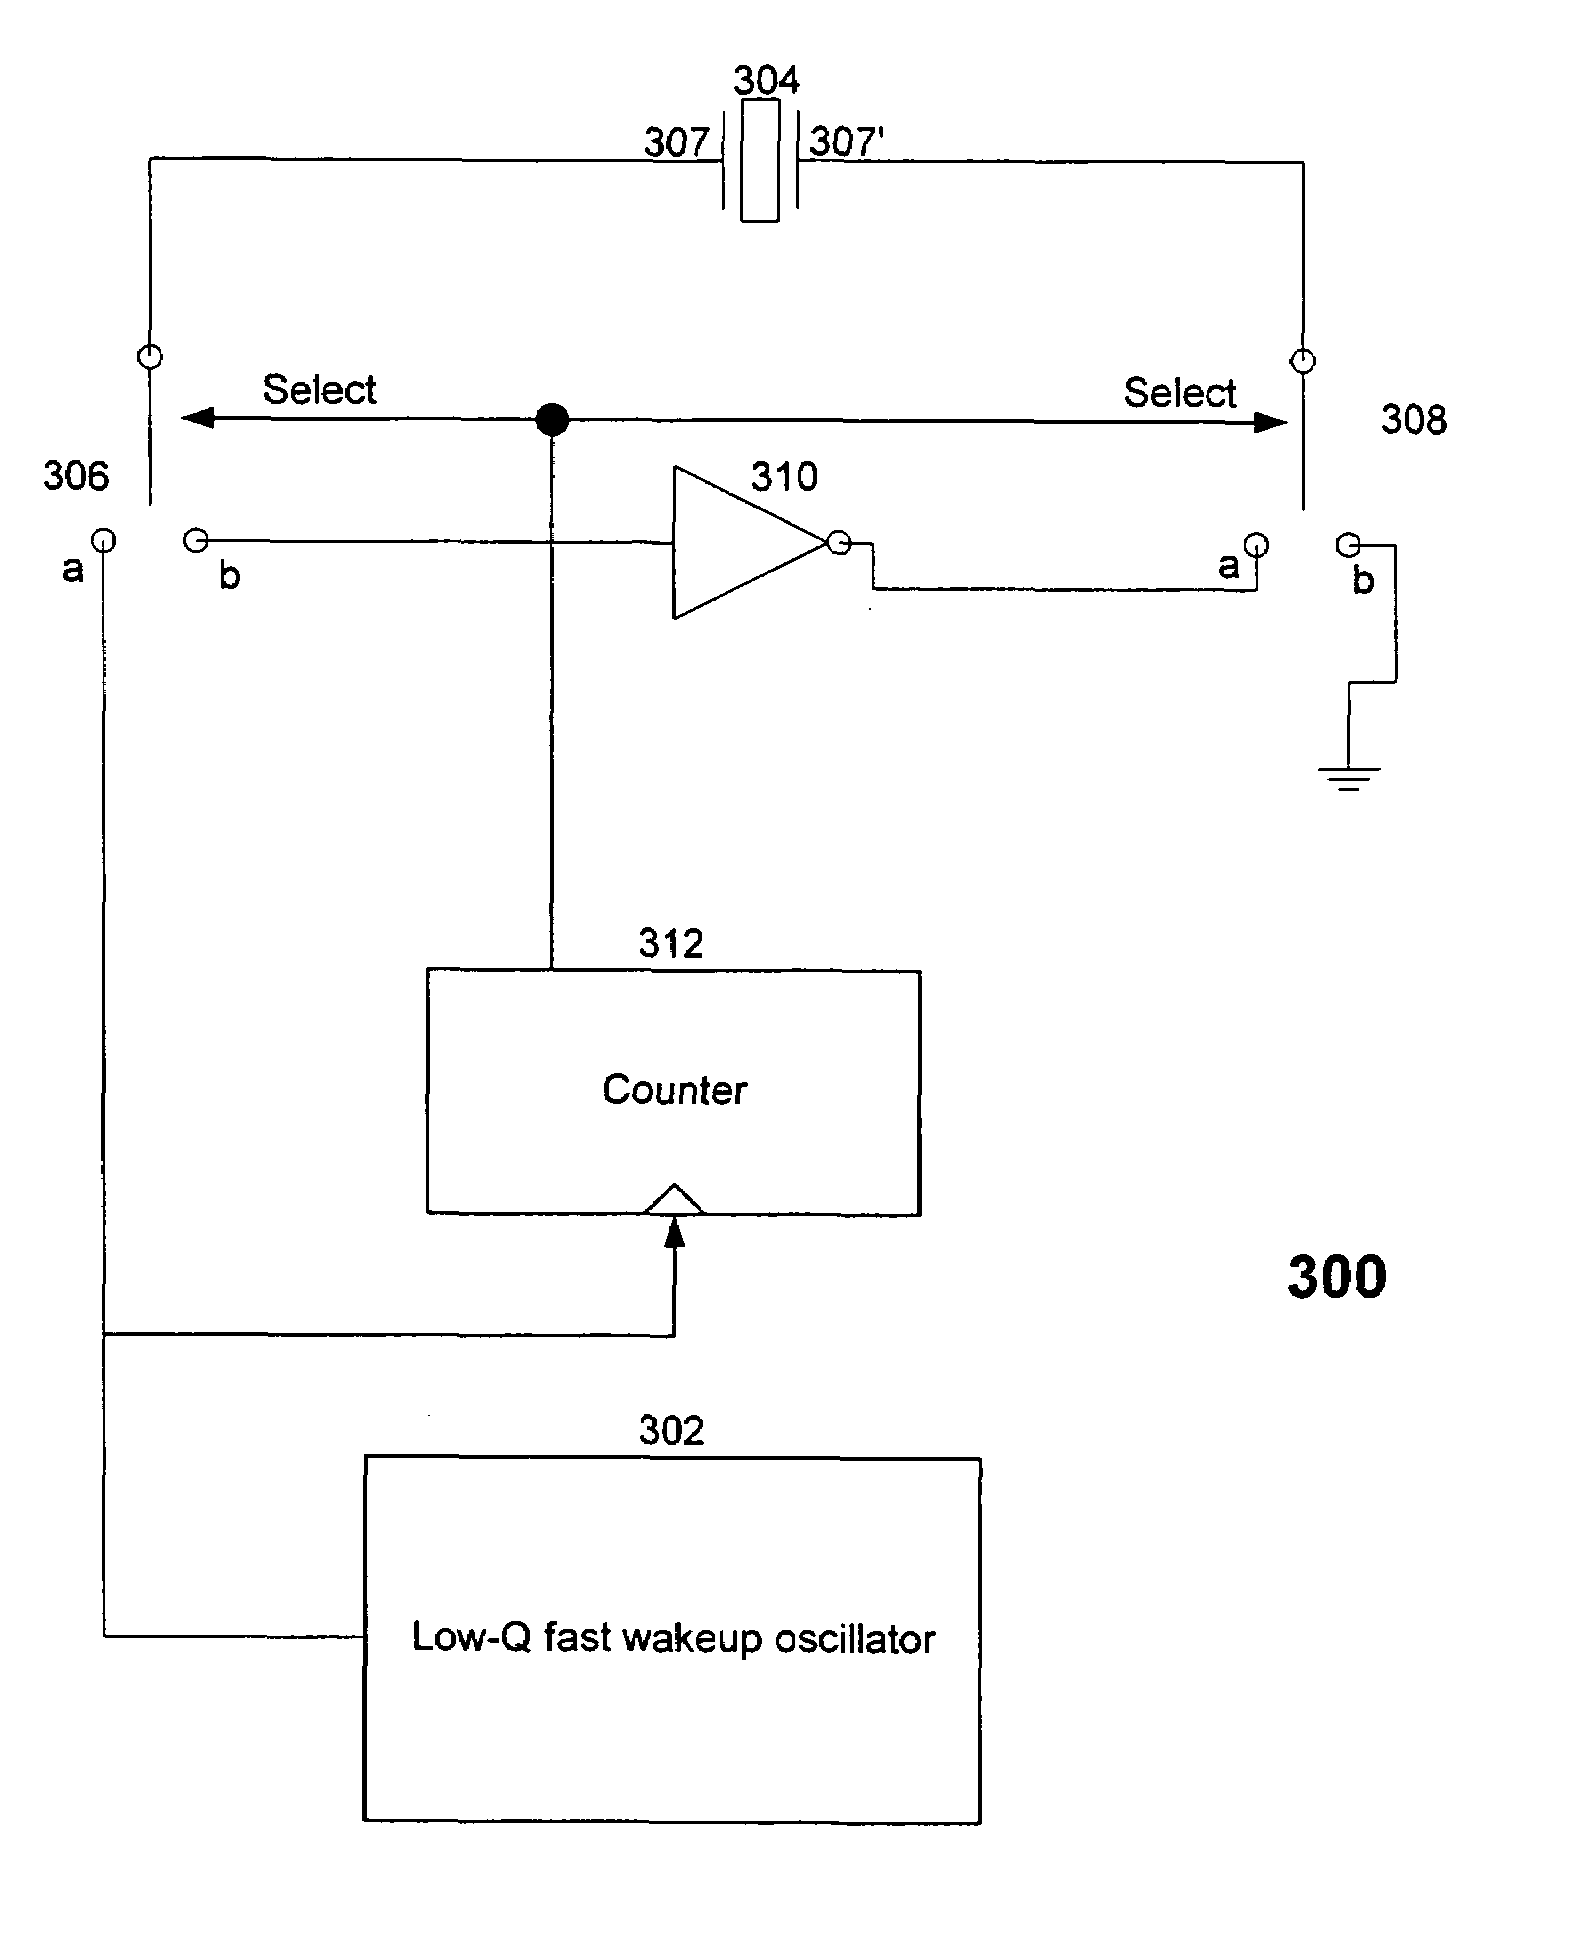 Method and system for fast wake-up of oscillators